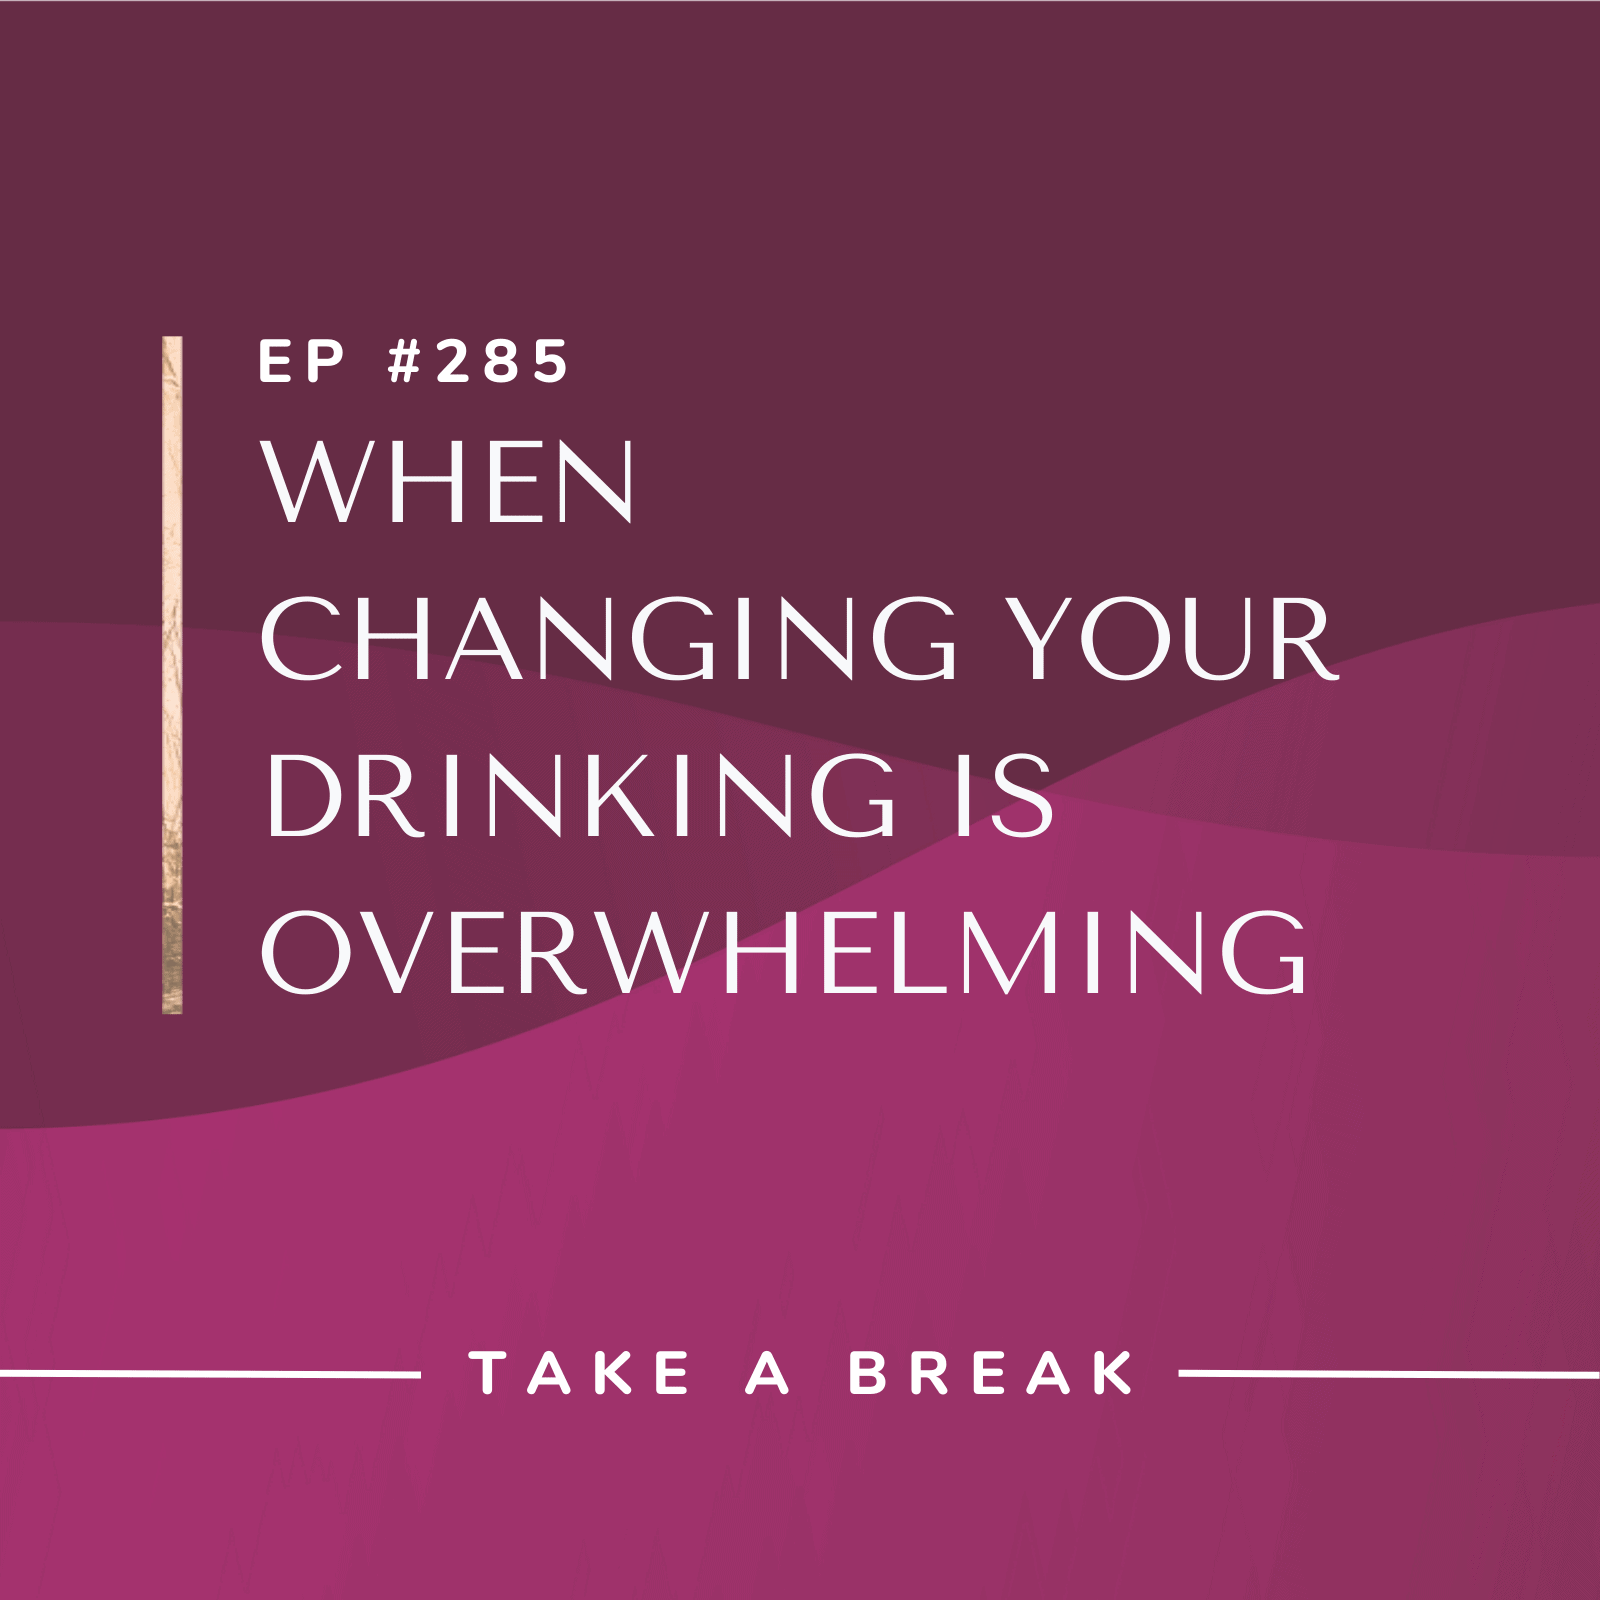 Take A Break from Drinking When Changing Your Drinking is Overwhelming